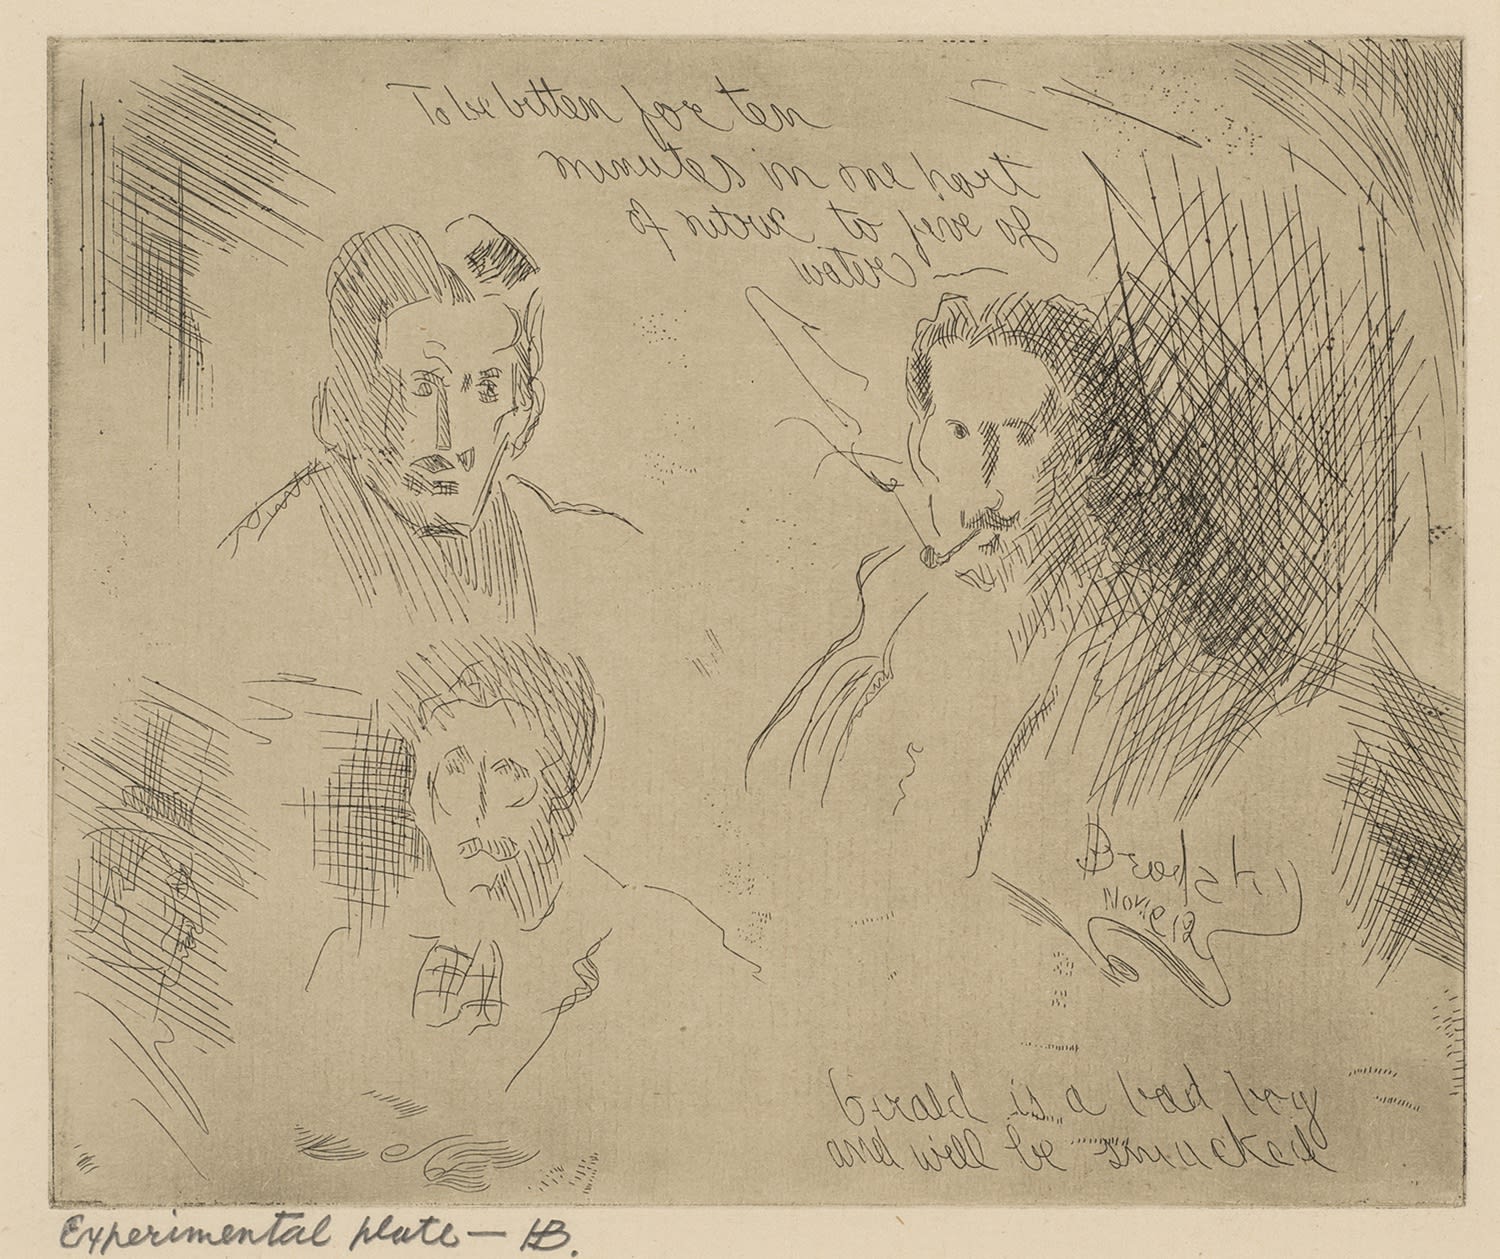 Horace Brodzky (1885-1969) Experimental Plate 1B (Three Self Portraits) c. 1912 Etching on paper 13.8 x 16.2 cm Ben Uri Collection © Horace Brodzky estate To see and discover more about this artist click here